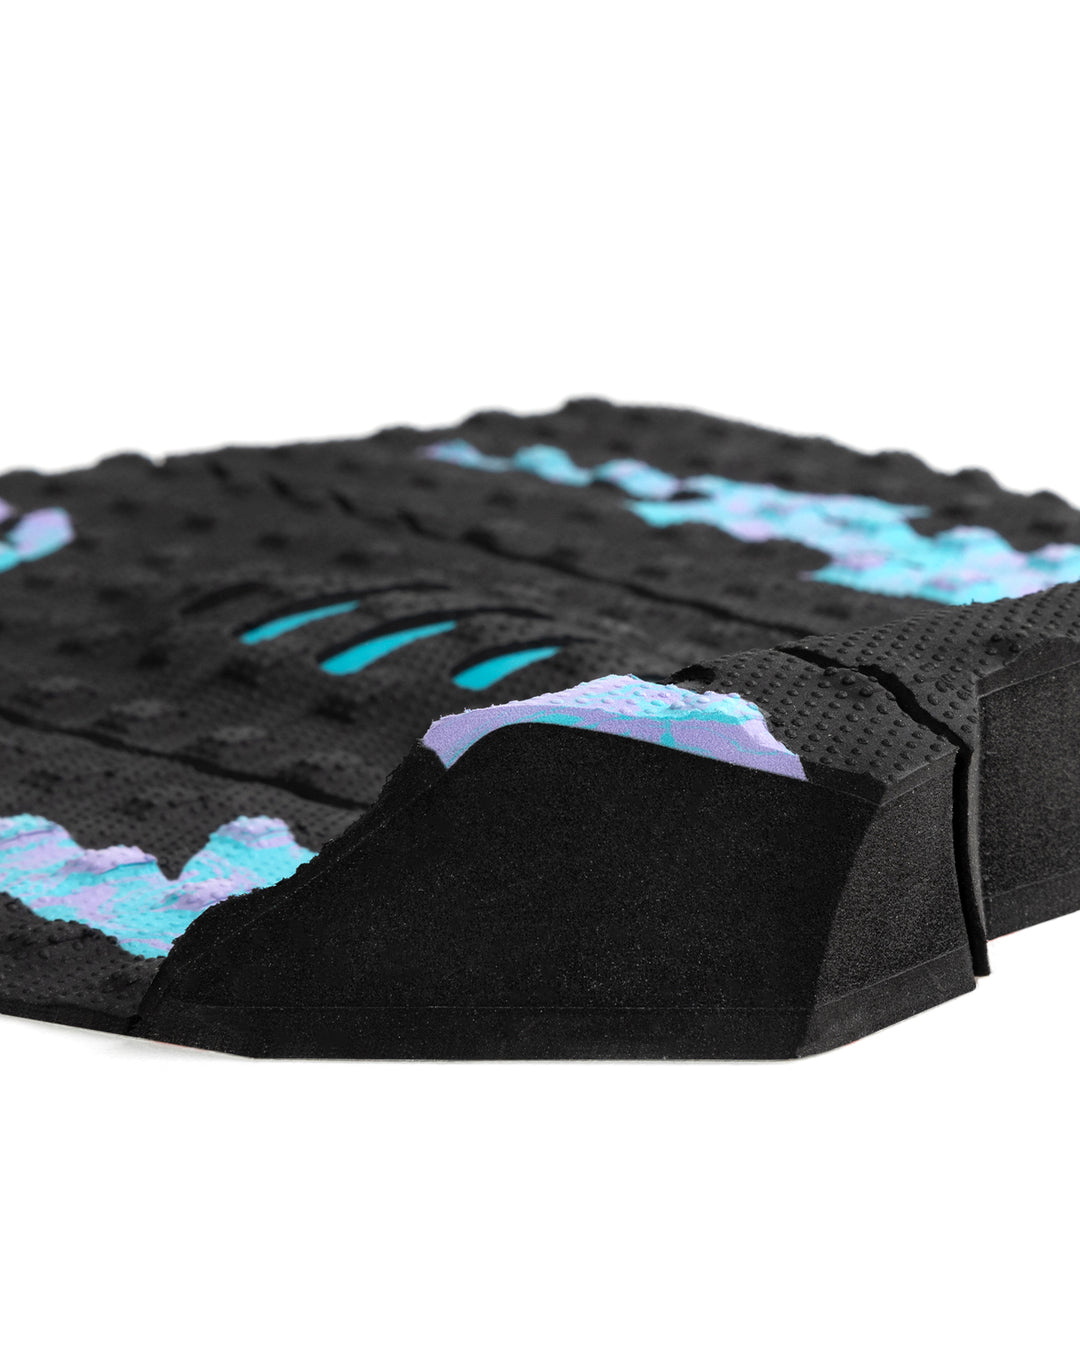 GROM Mick Eugene Fanning Signature Traction Pad